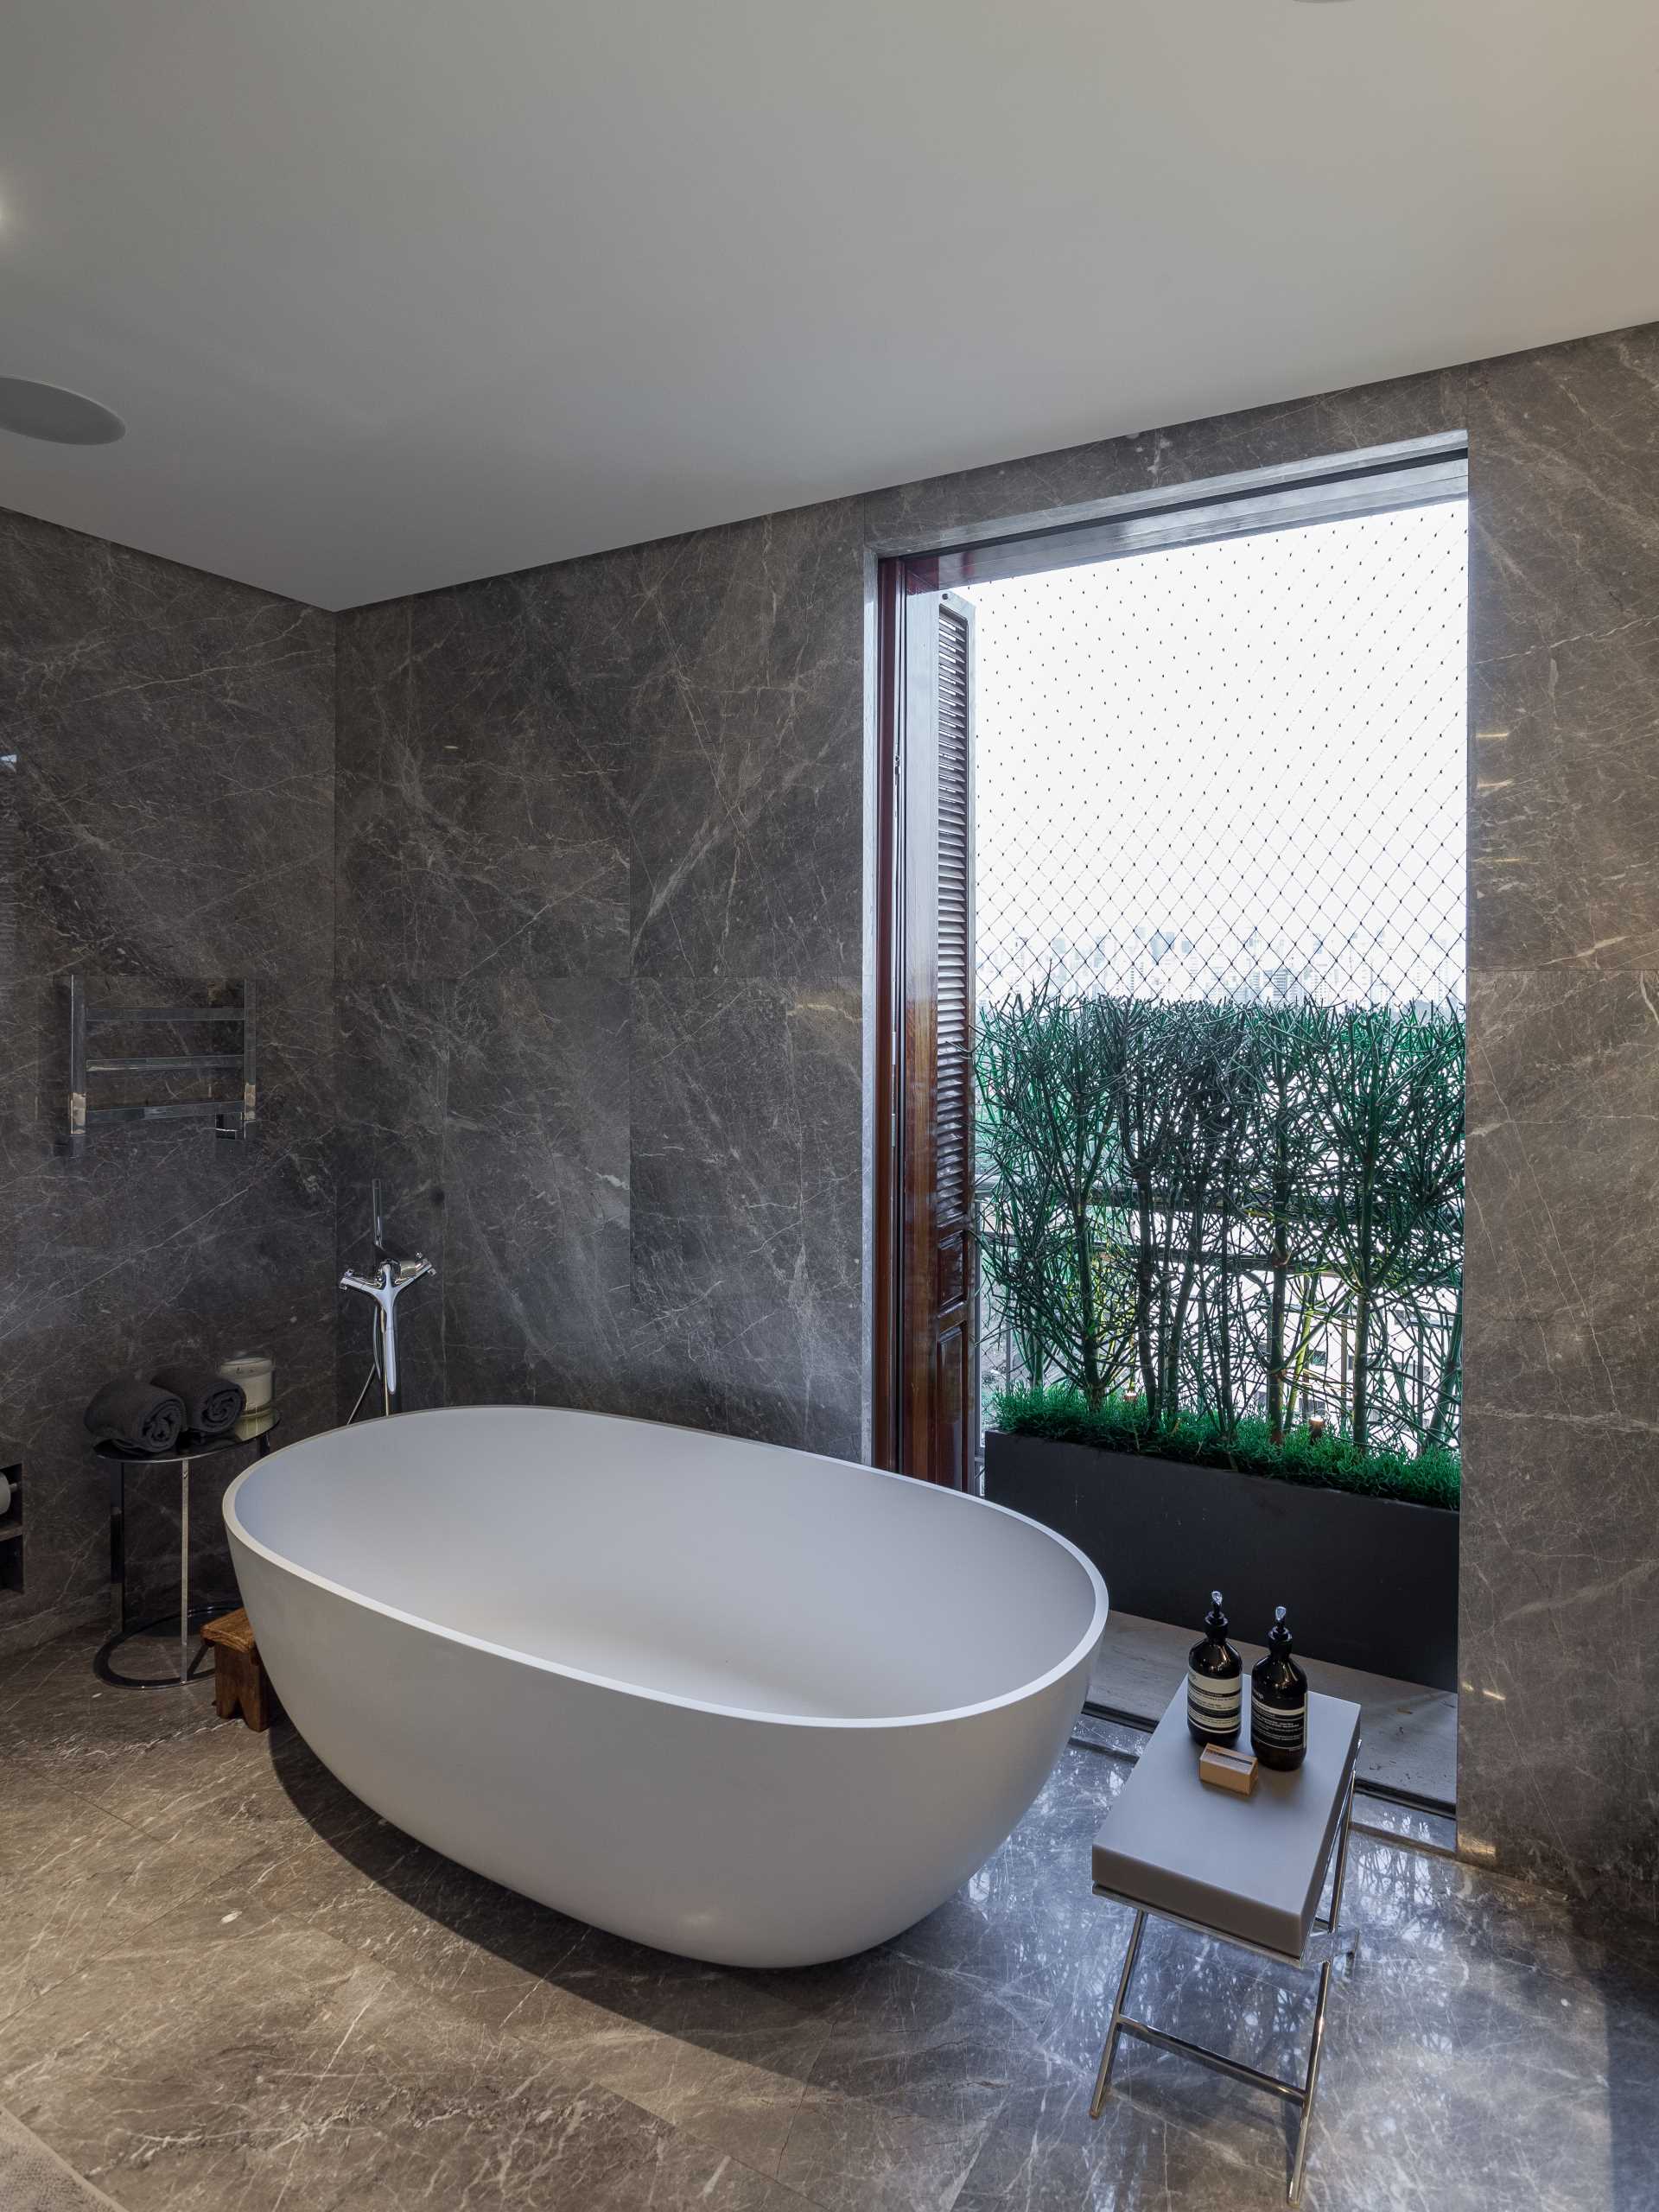 This modern bathroom includes a vanity with built-in sink, a walk-in shower with a bench and shower niche, as well as a freestanding white bathtub by the window.